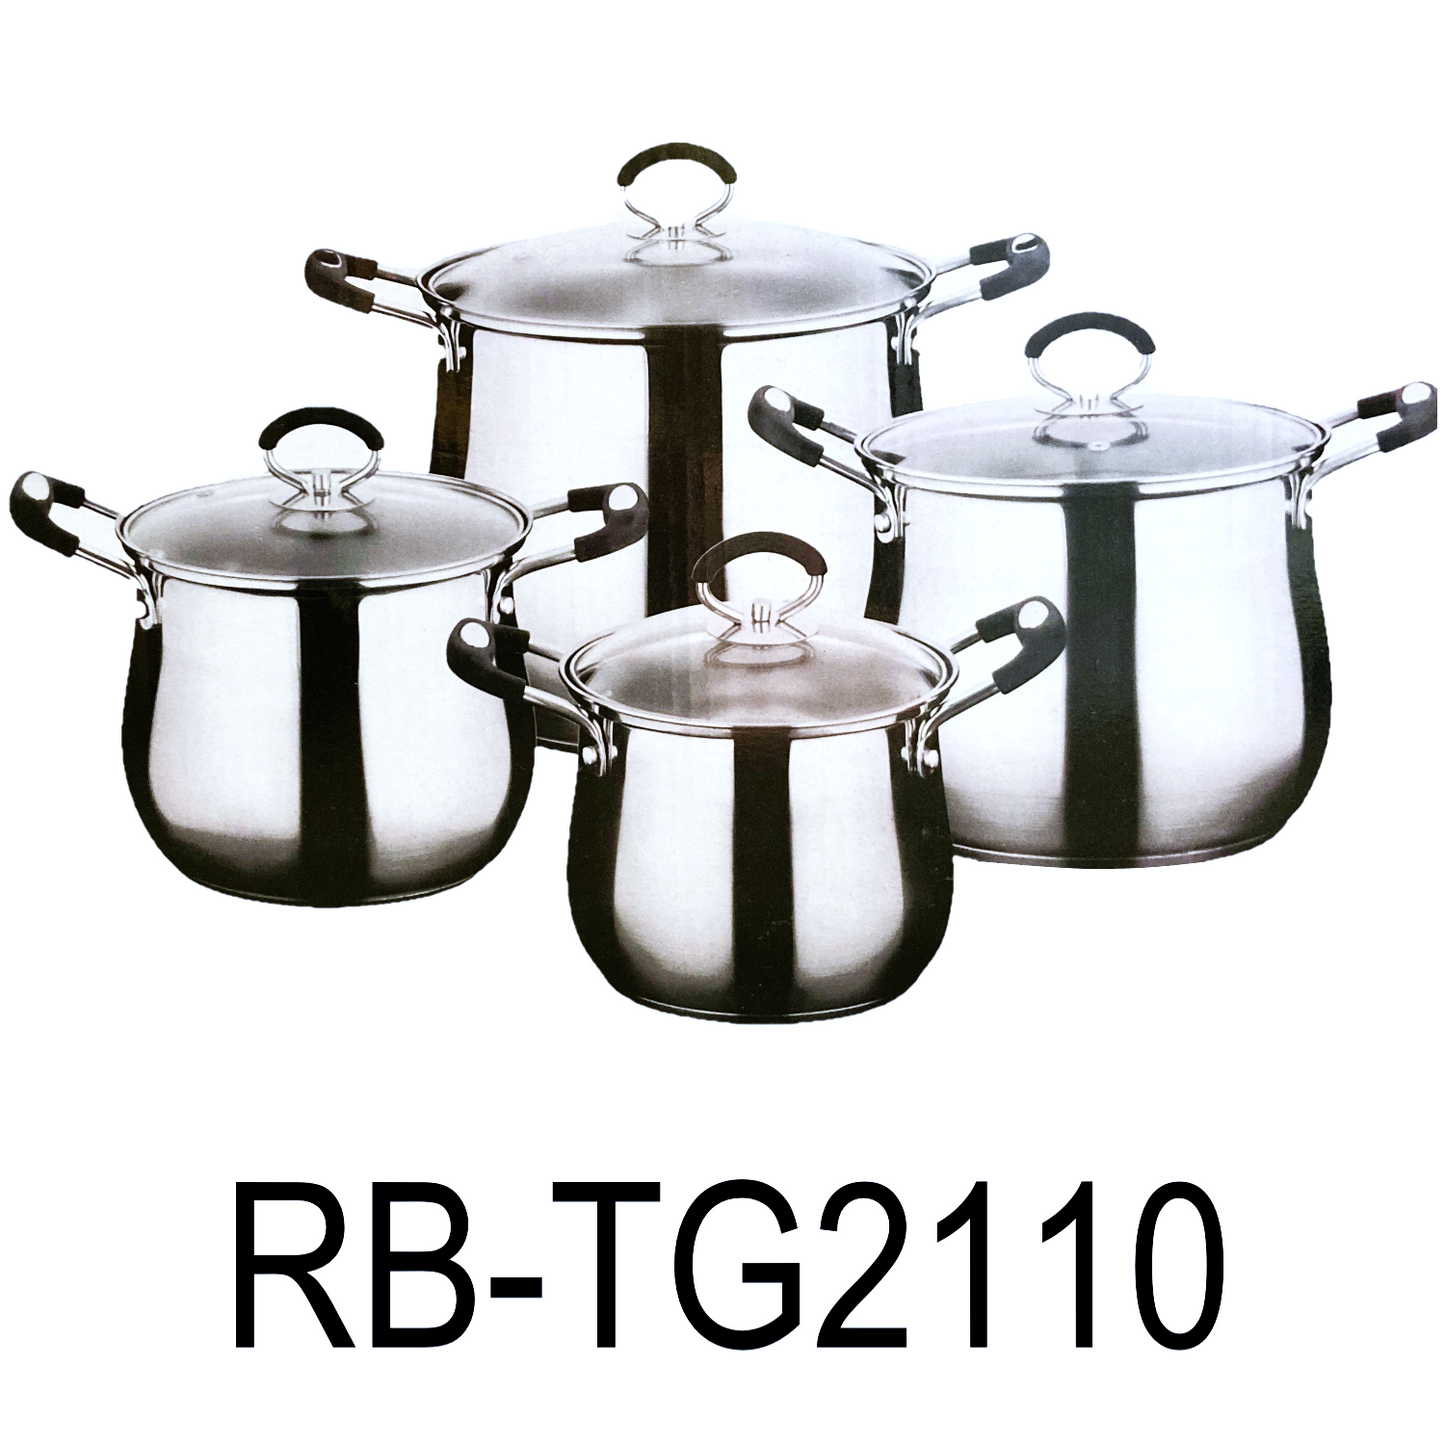 8 PC Stainless Steel Cookware Set With Silicone Handles